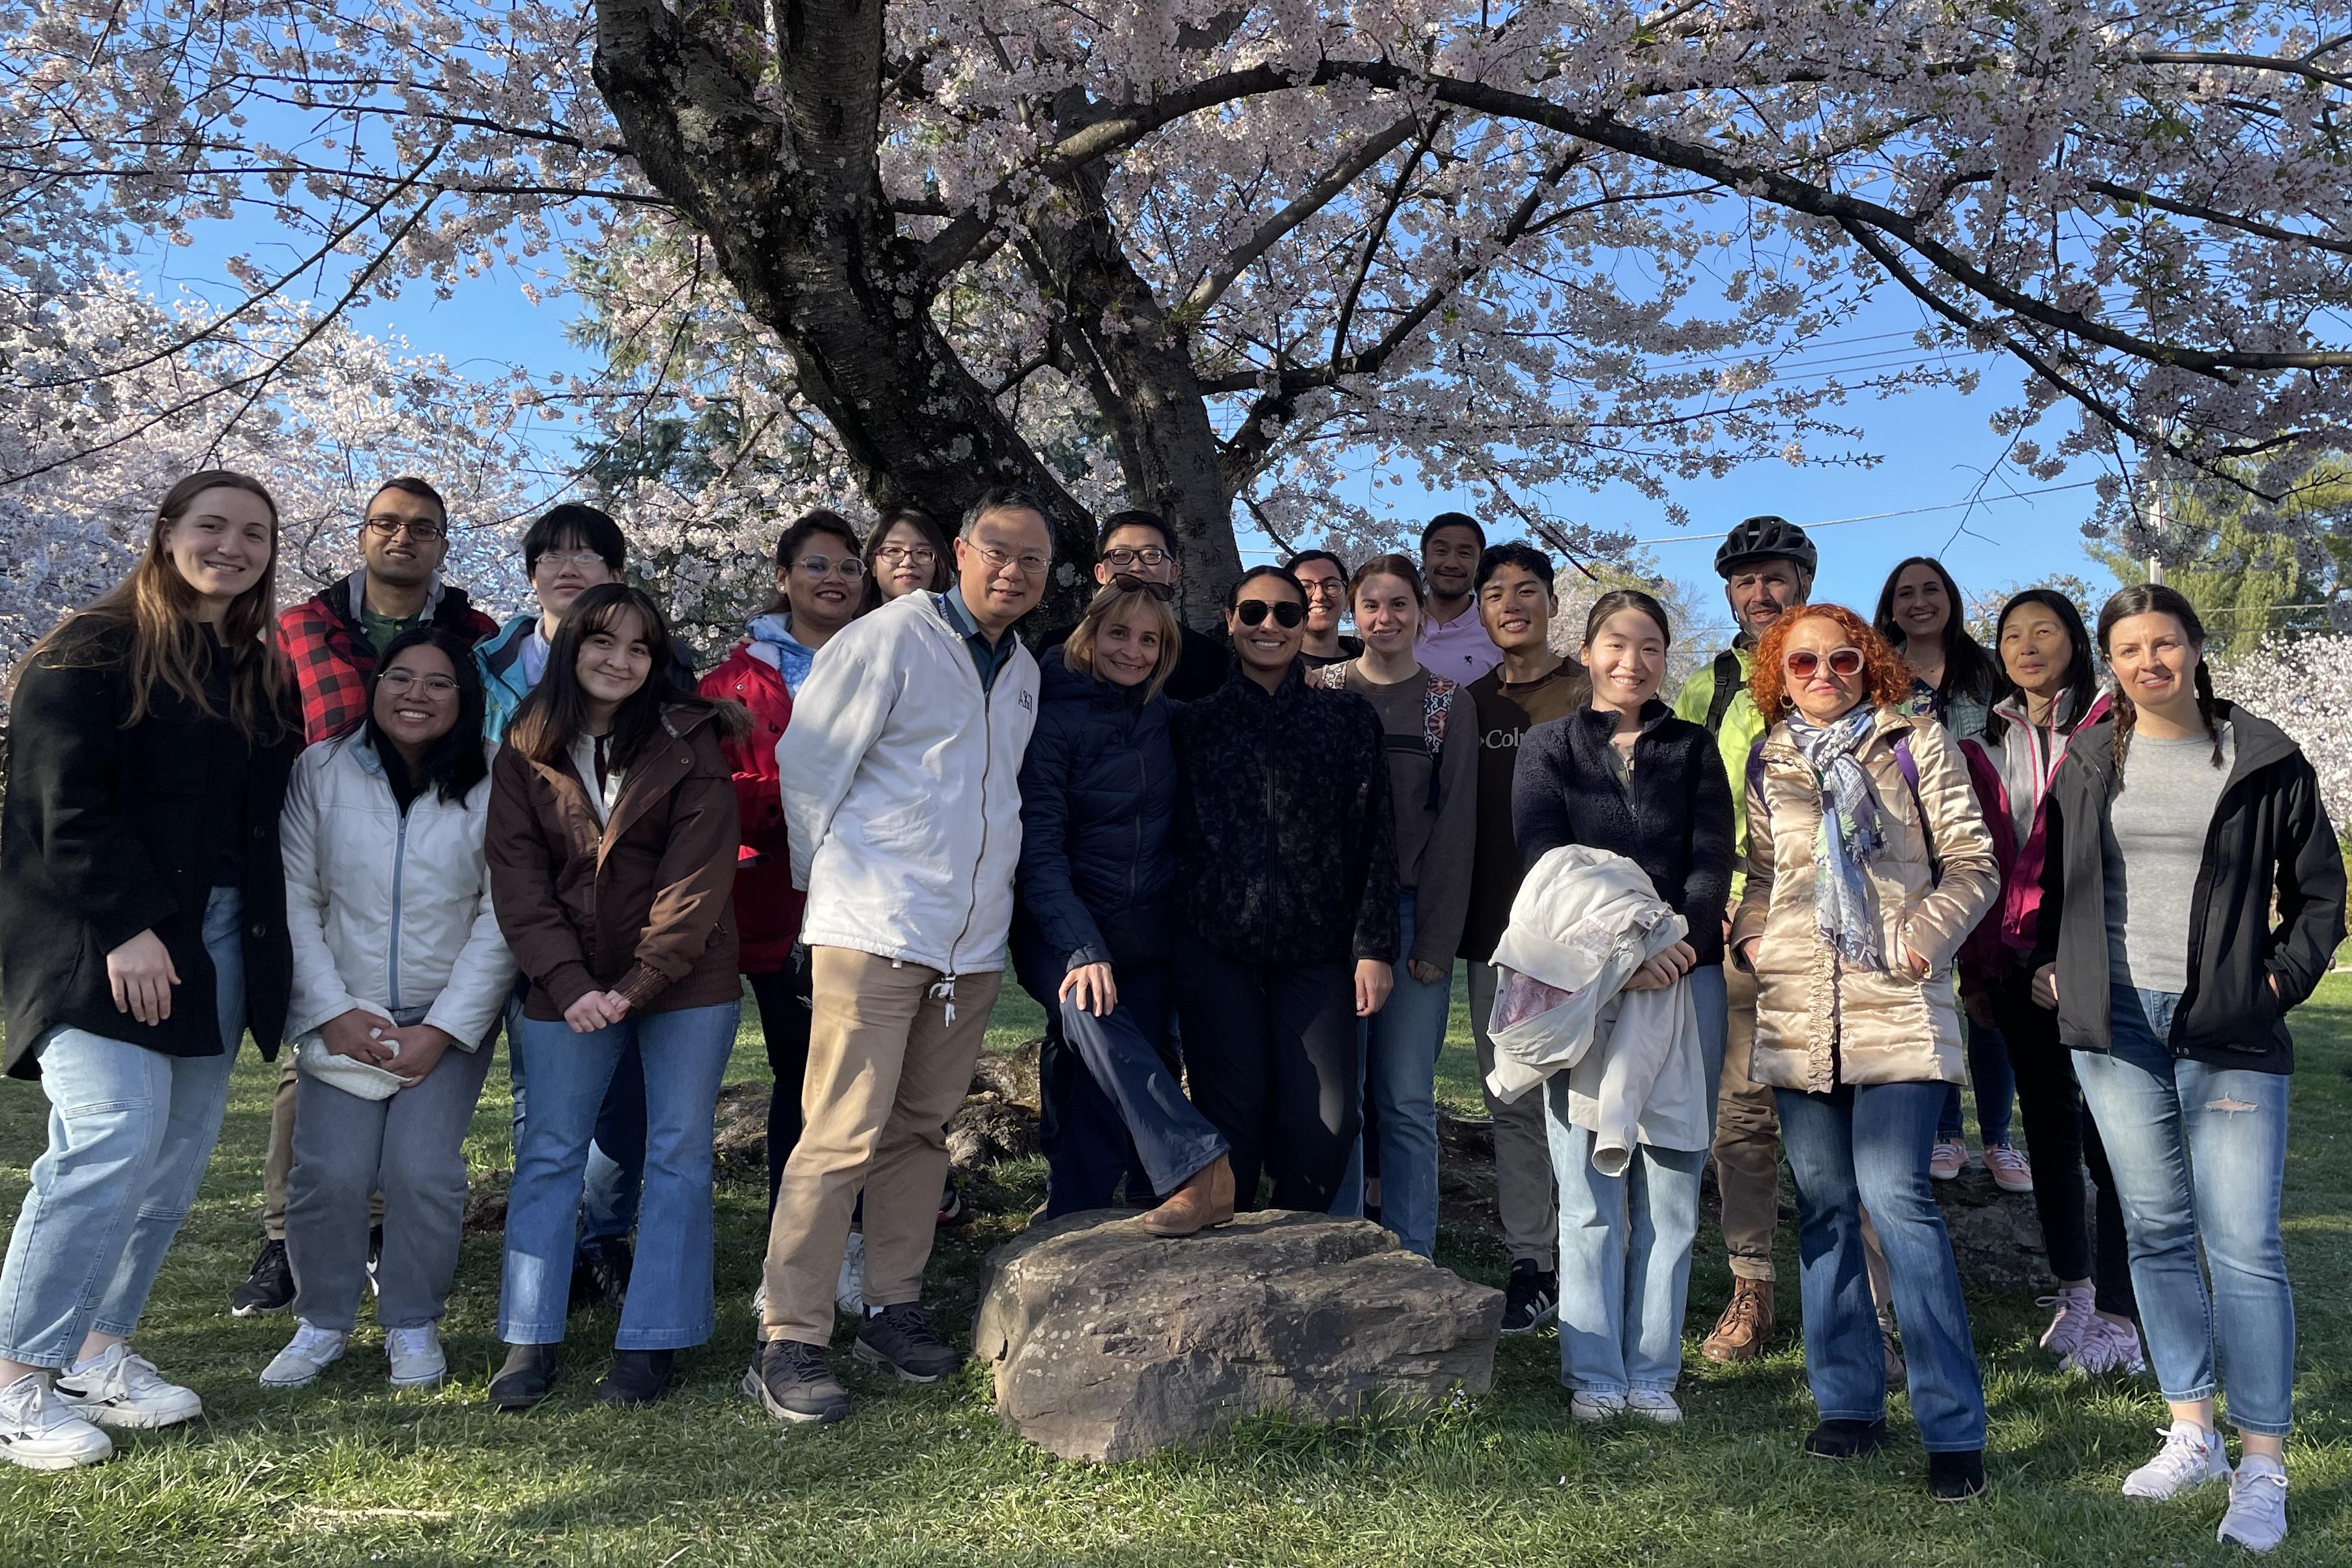 LCBG at the cherry blossoms